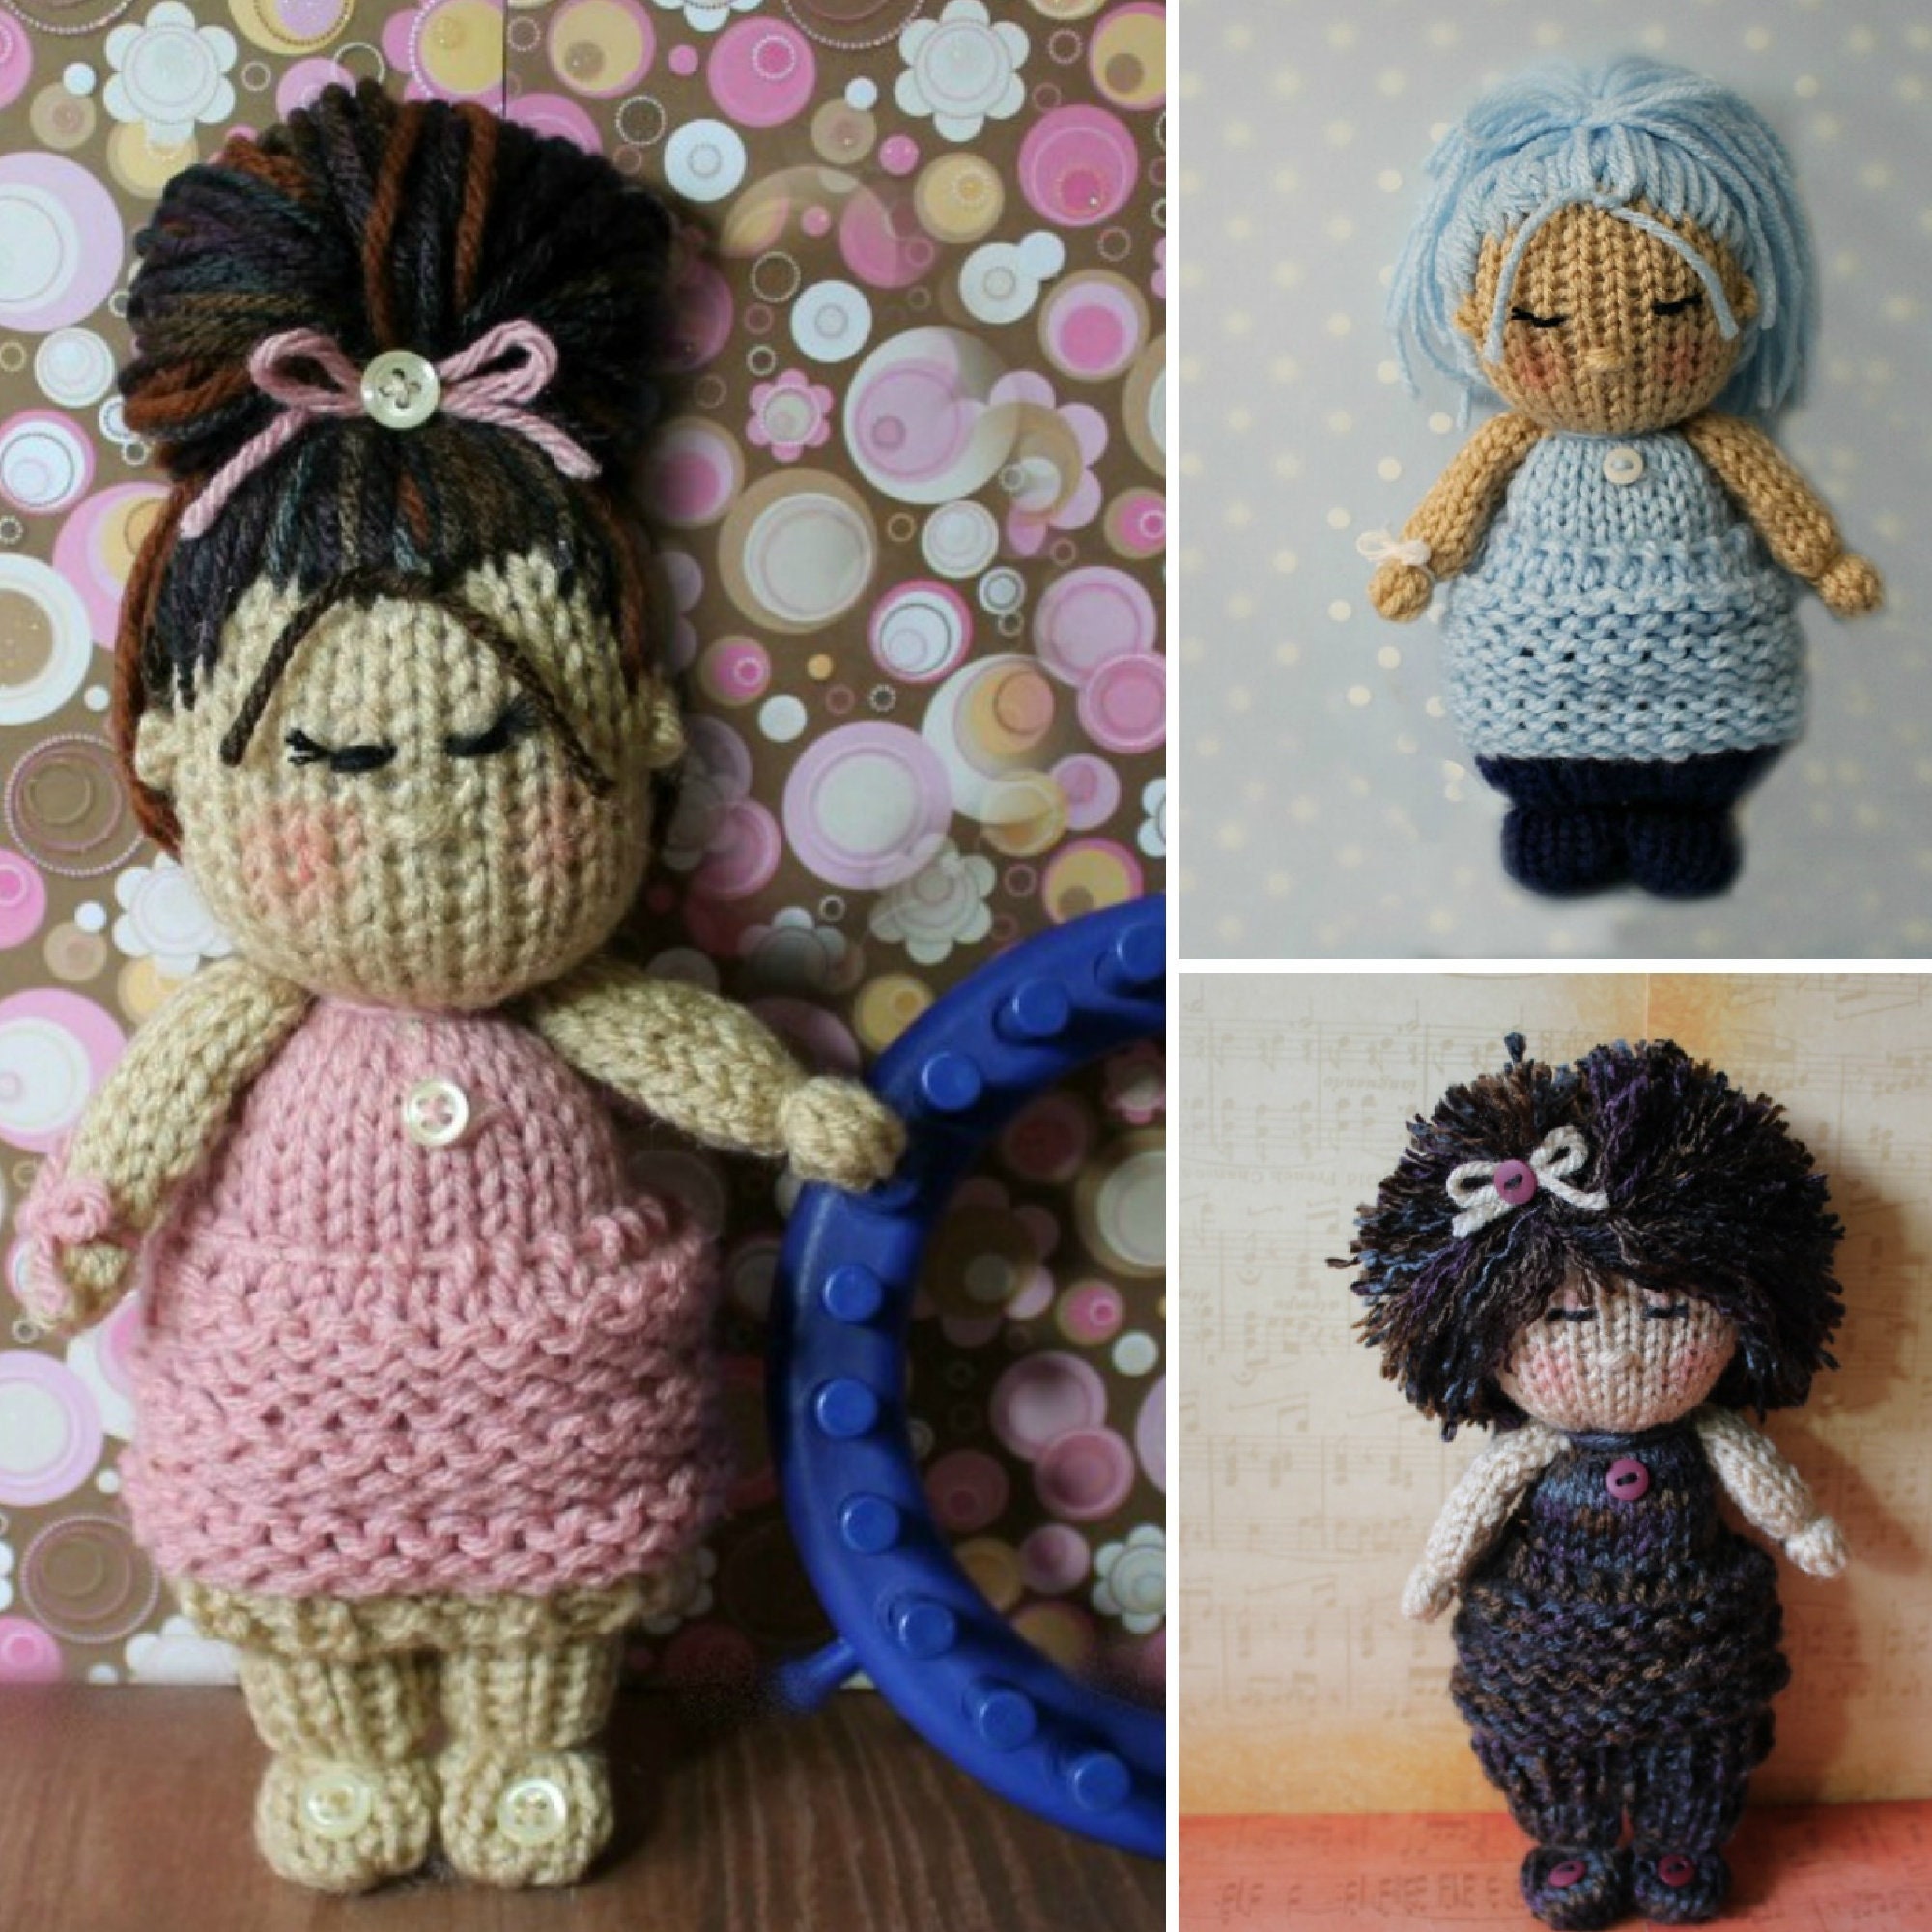 Loom Knitting Comfort Dolls: One Basic Step by Step Pattern with Video  Tutorial See more